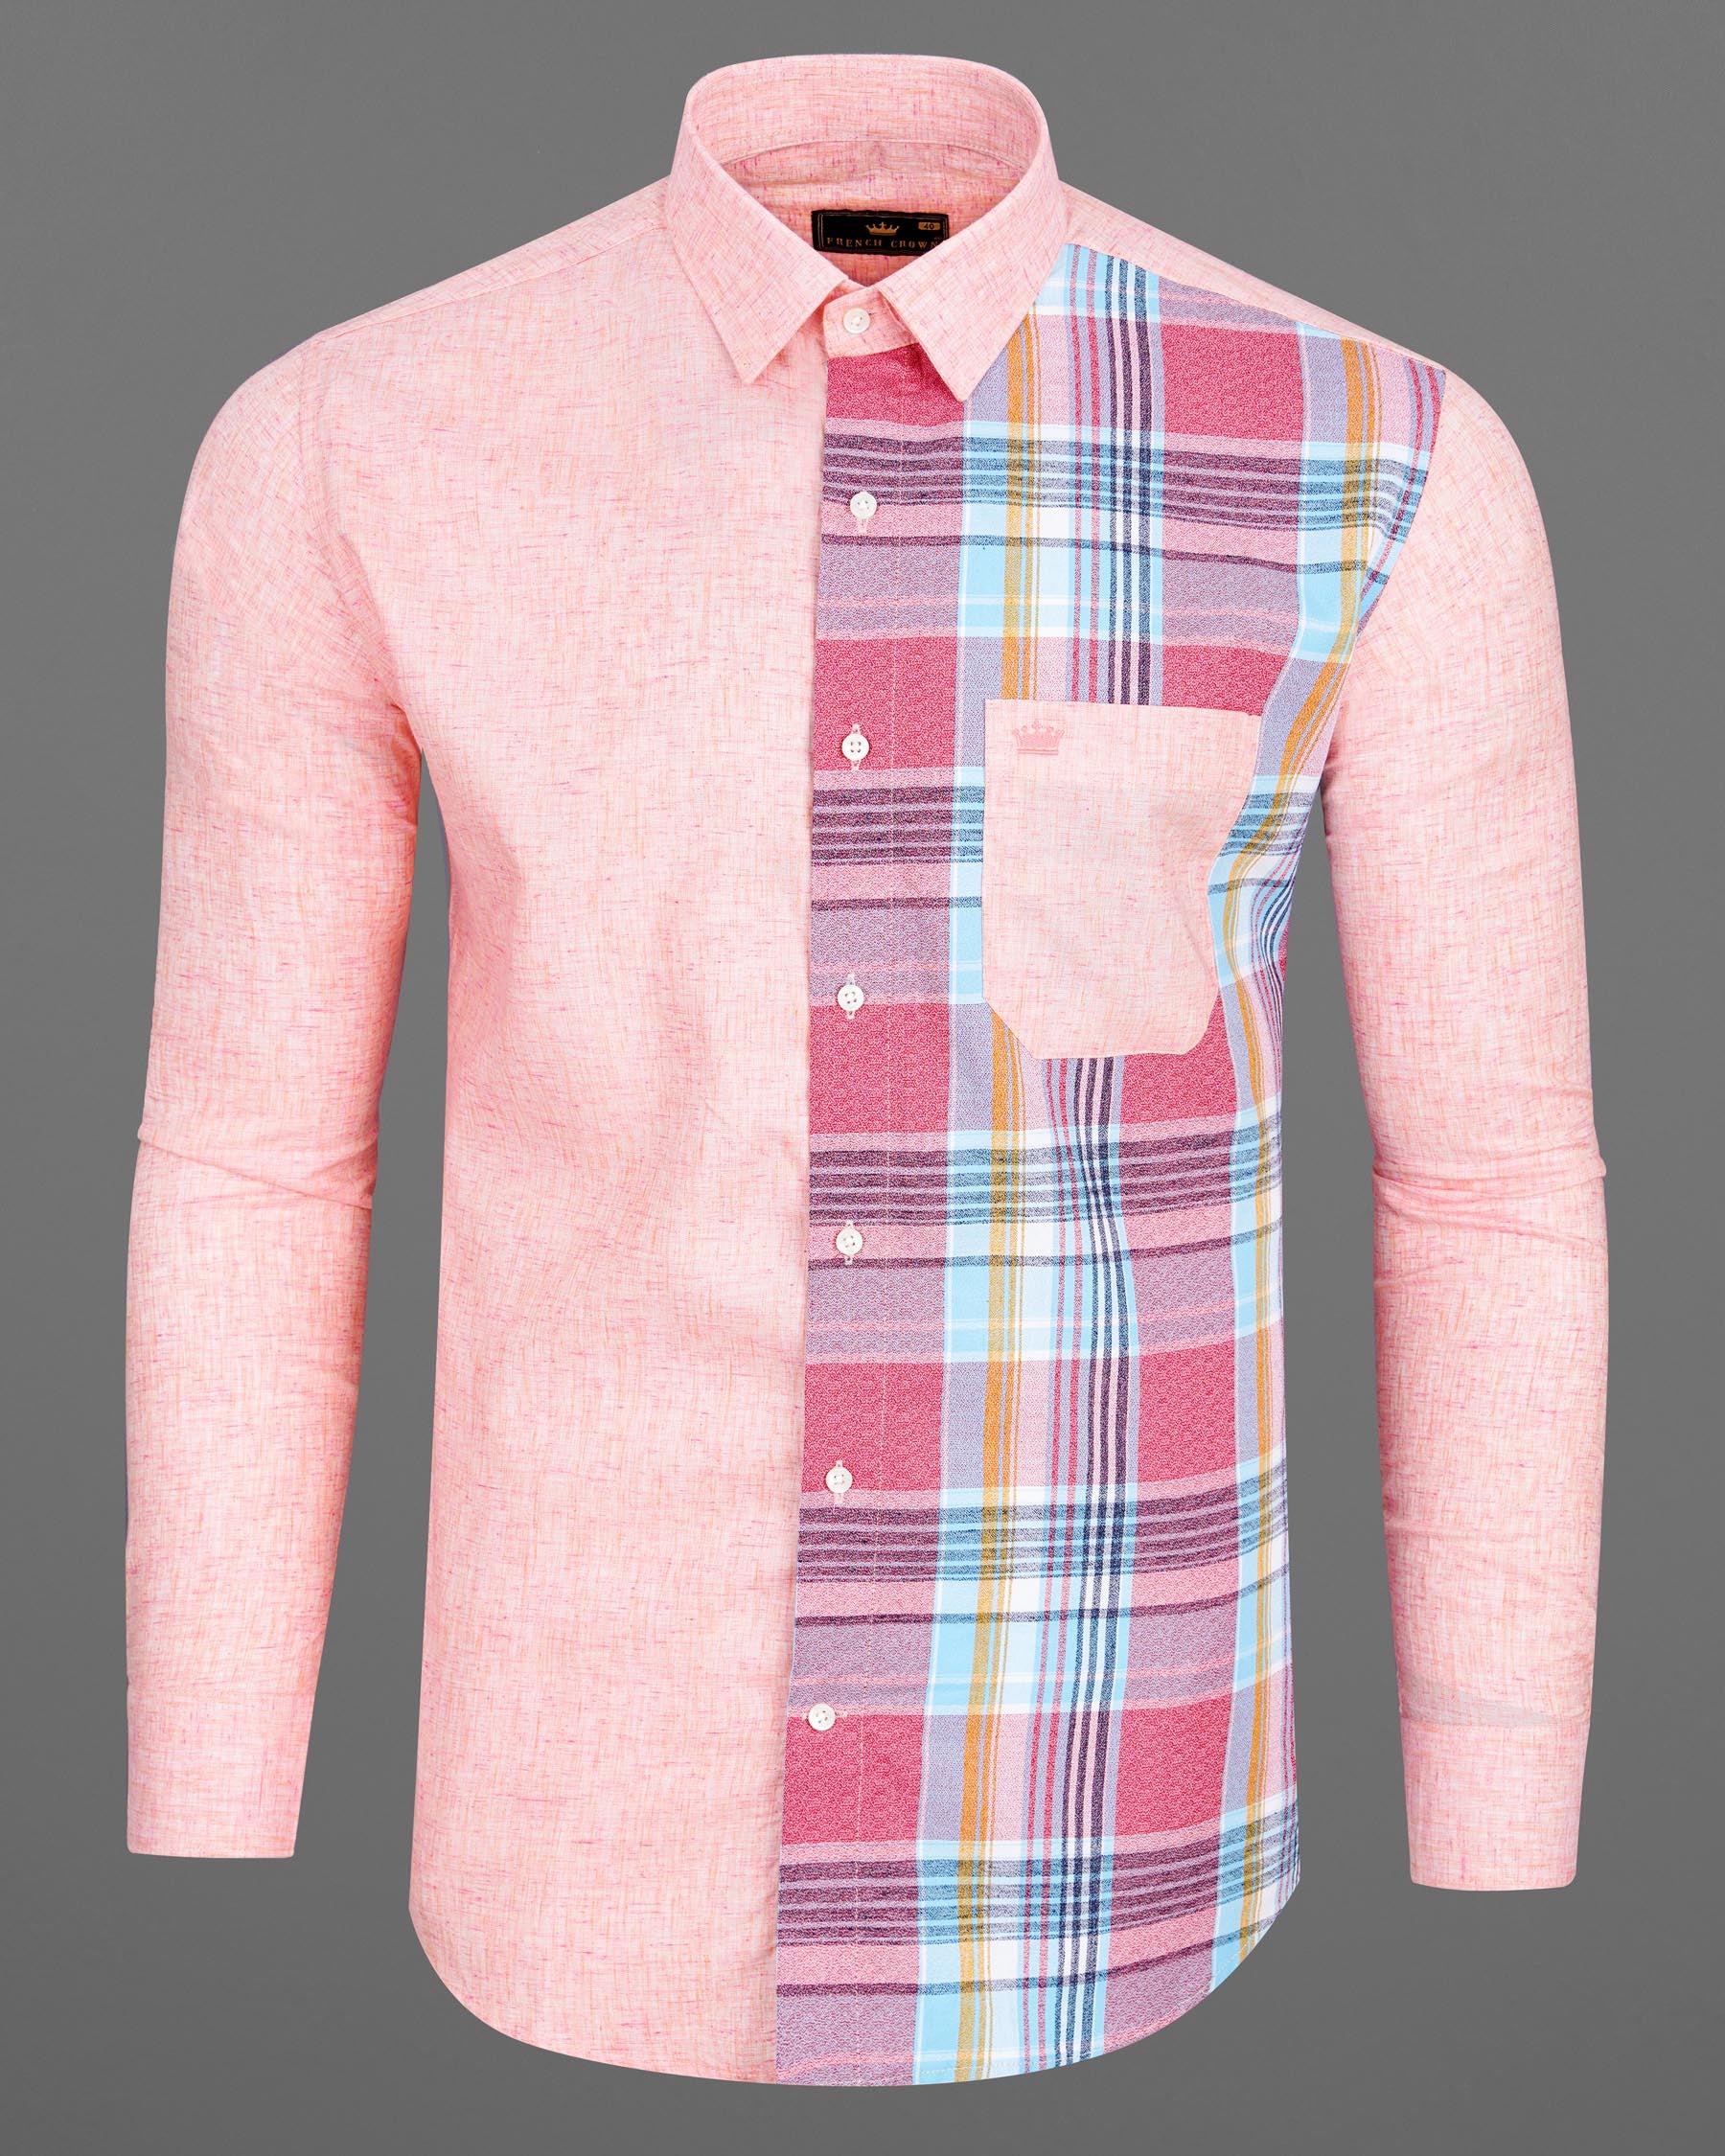 Cosmos Pink and Froly Pink Dobby Textured Premium Giza Cotton Designer Shirt 7717-P189-38,7717-P189-38,7717-P189-39,7717-P189-39,7717-P189-40,7717-P189-40,7717-P189-42,7717-P189-42,7717-P189-44,7717-P189-44,7717-P189-46,7717-P189-46,7717-P189-48,7717-P189-48,7717-P189-50,7717-P189-50,7717-P189-52,7717-P189-52